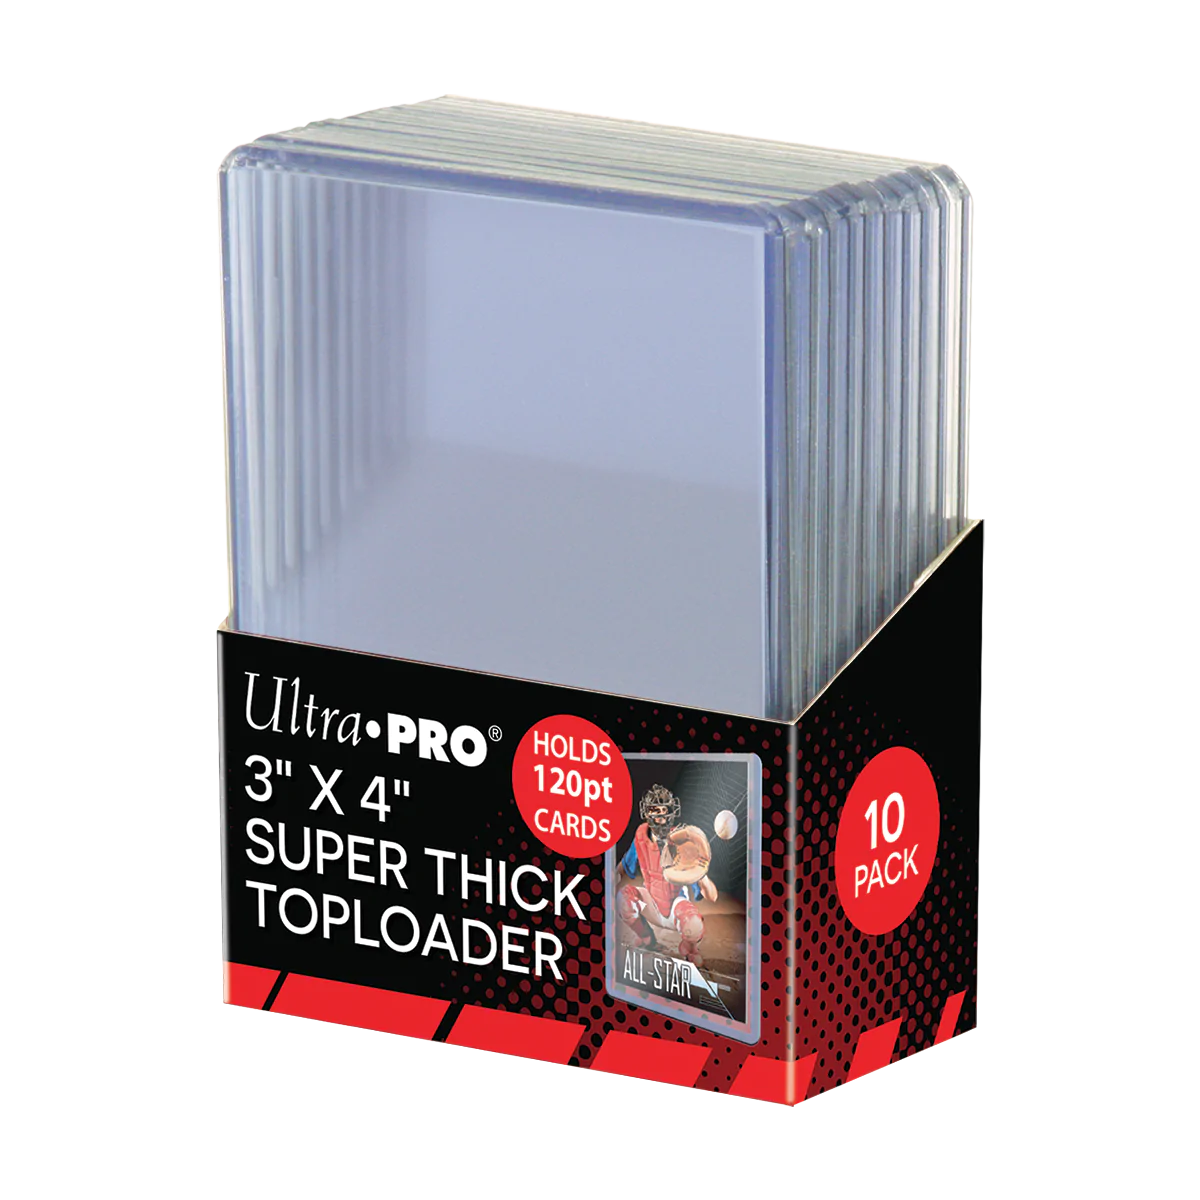 Ultra Pro - 3"x4" Super Thick 120PT Toploaders - 10 pack